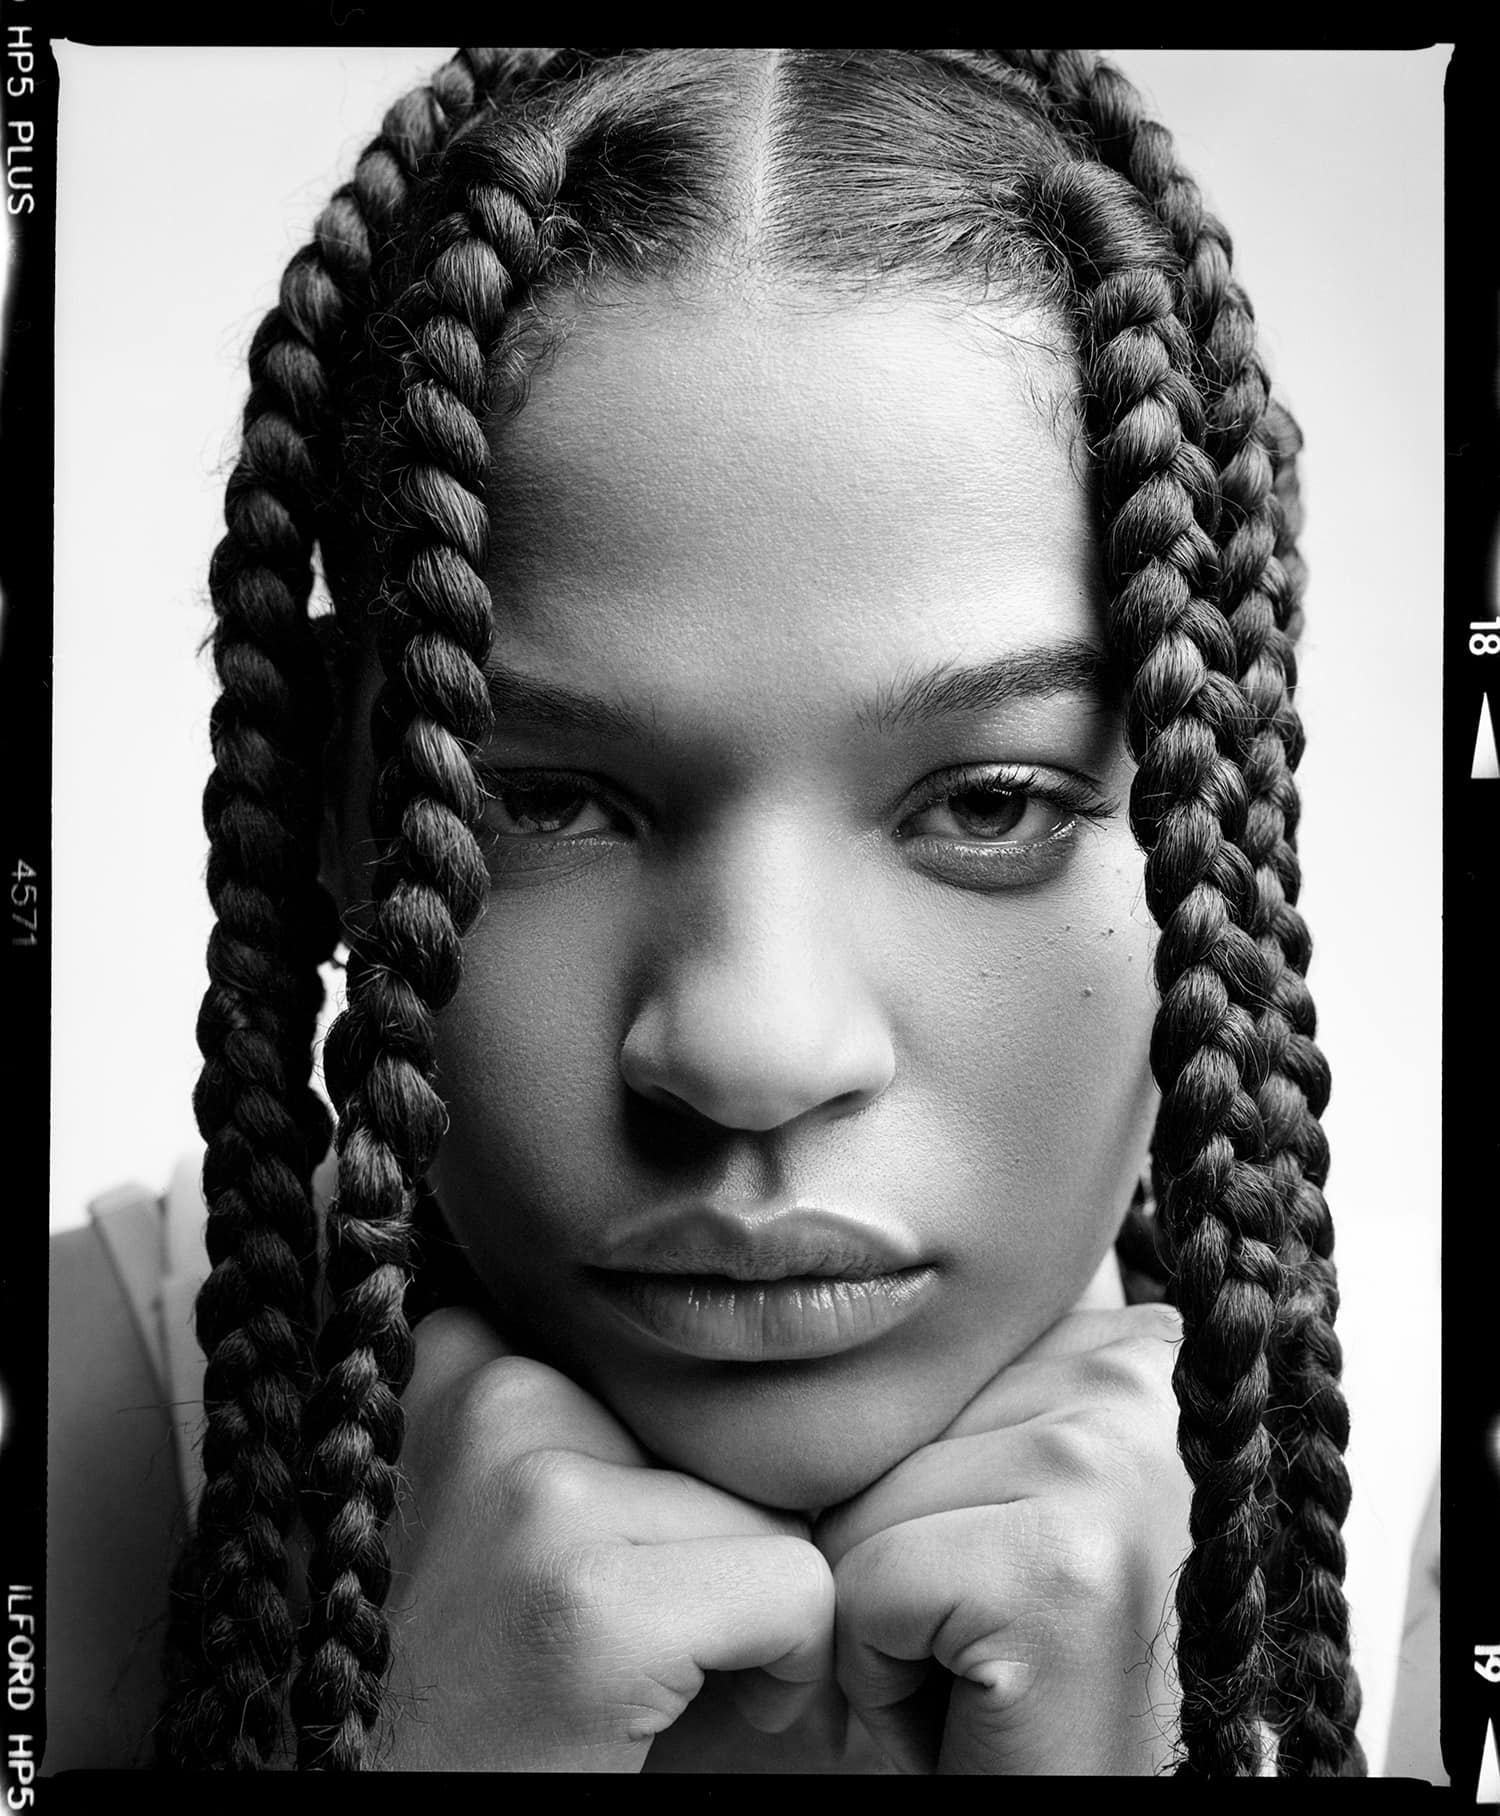 Female Spirit model Candace Demers, sitting with er face in her hands, looking into the camera. Long braids. Portrait photographed by New York photographer Maria Bruun, studio photography setup, photographed using a Mamiya RZ67 camera and Ilford HP5 black and white film.